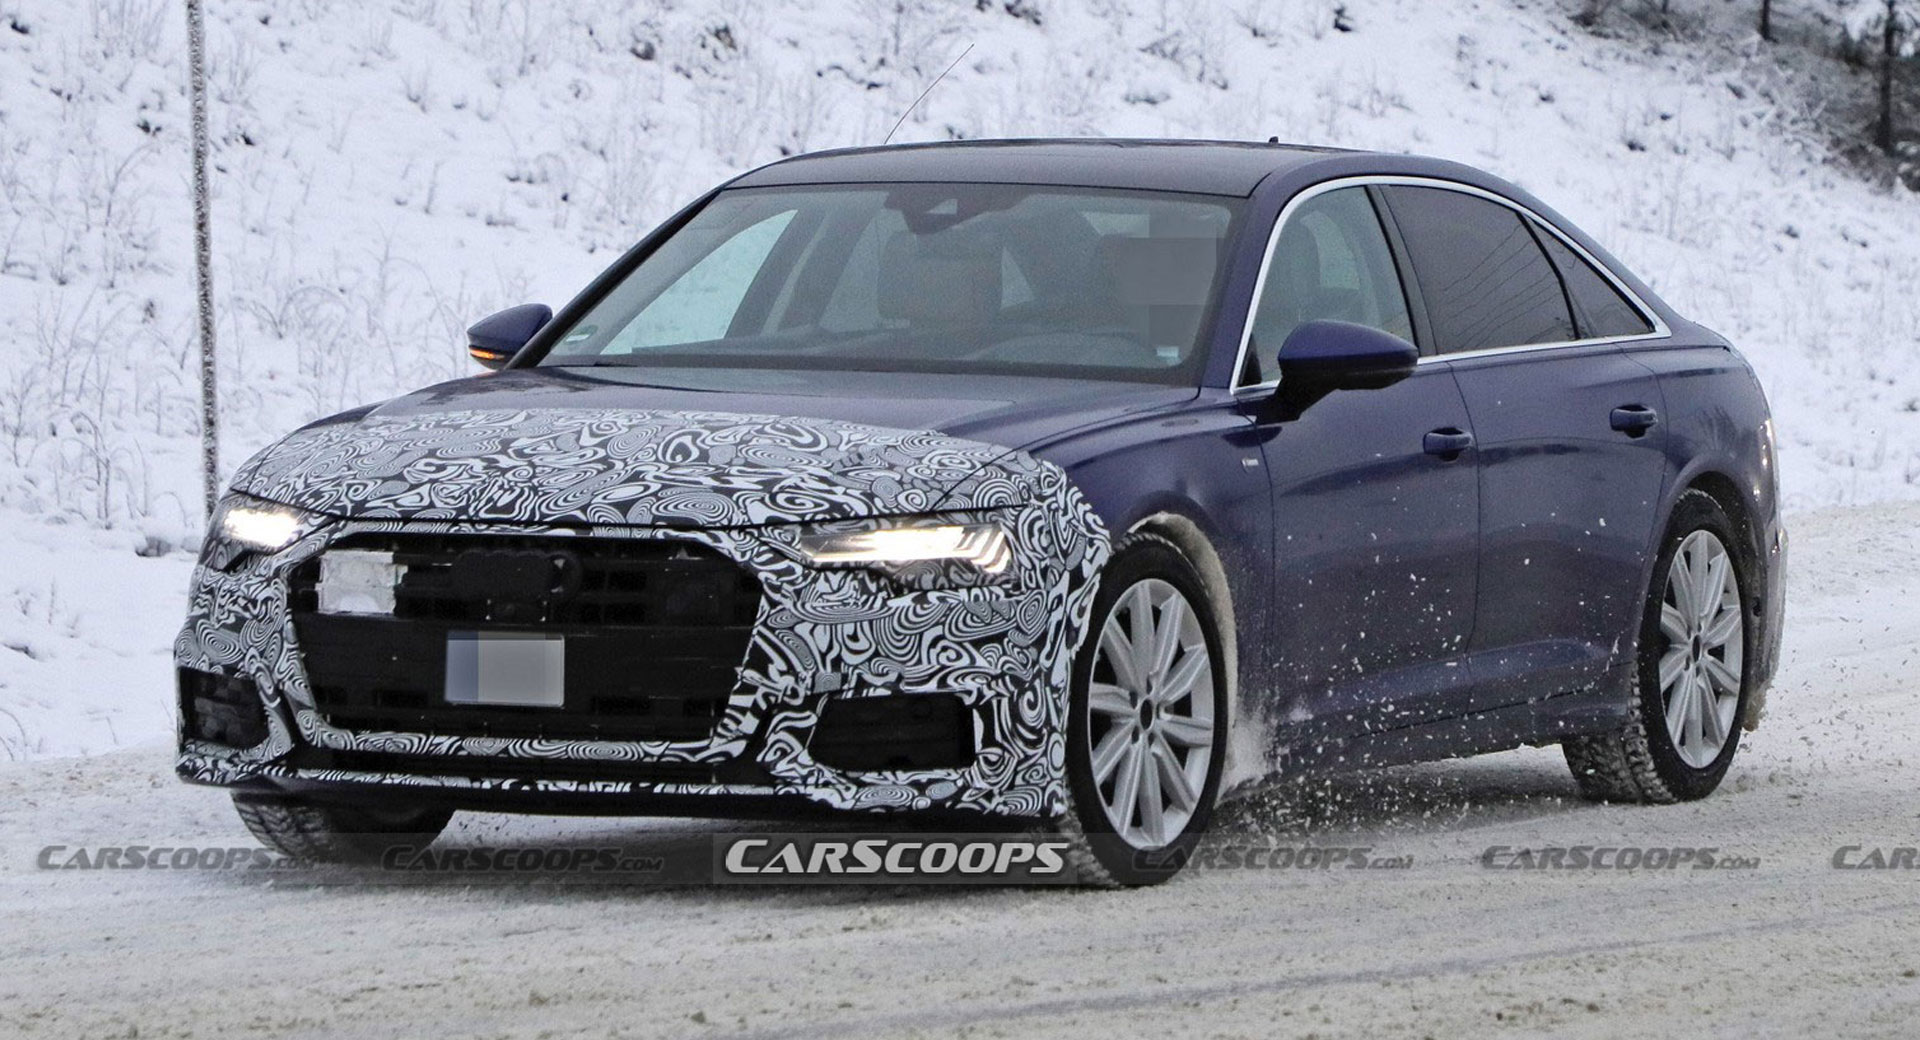 Specs for all Audi A6 (C8) versions